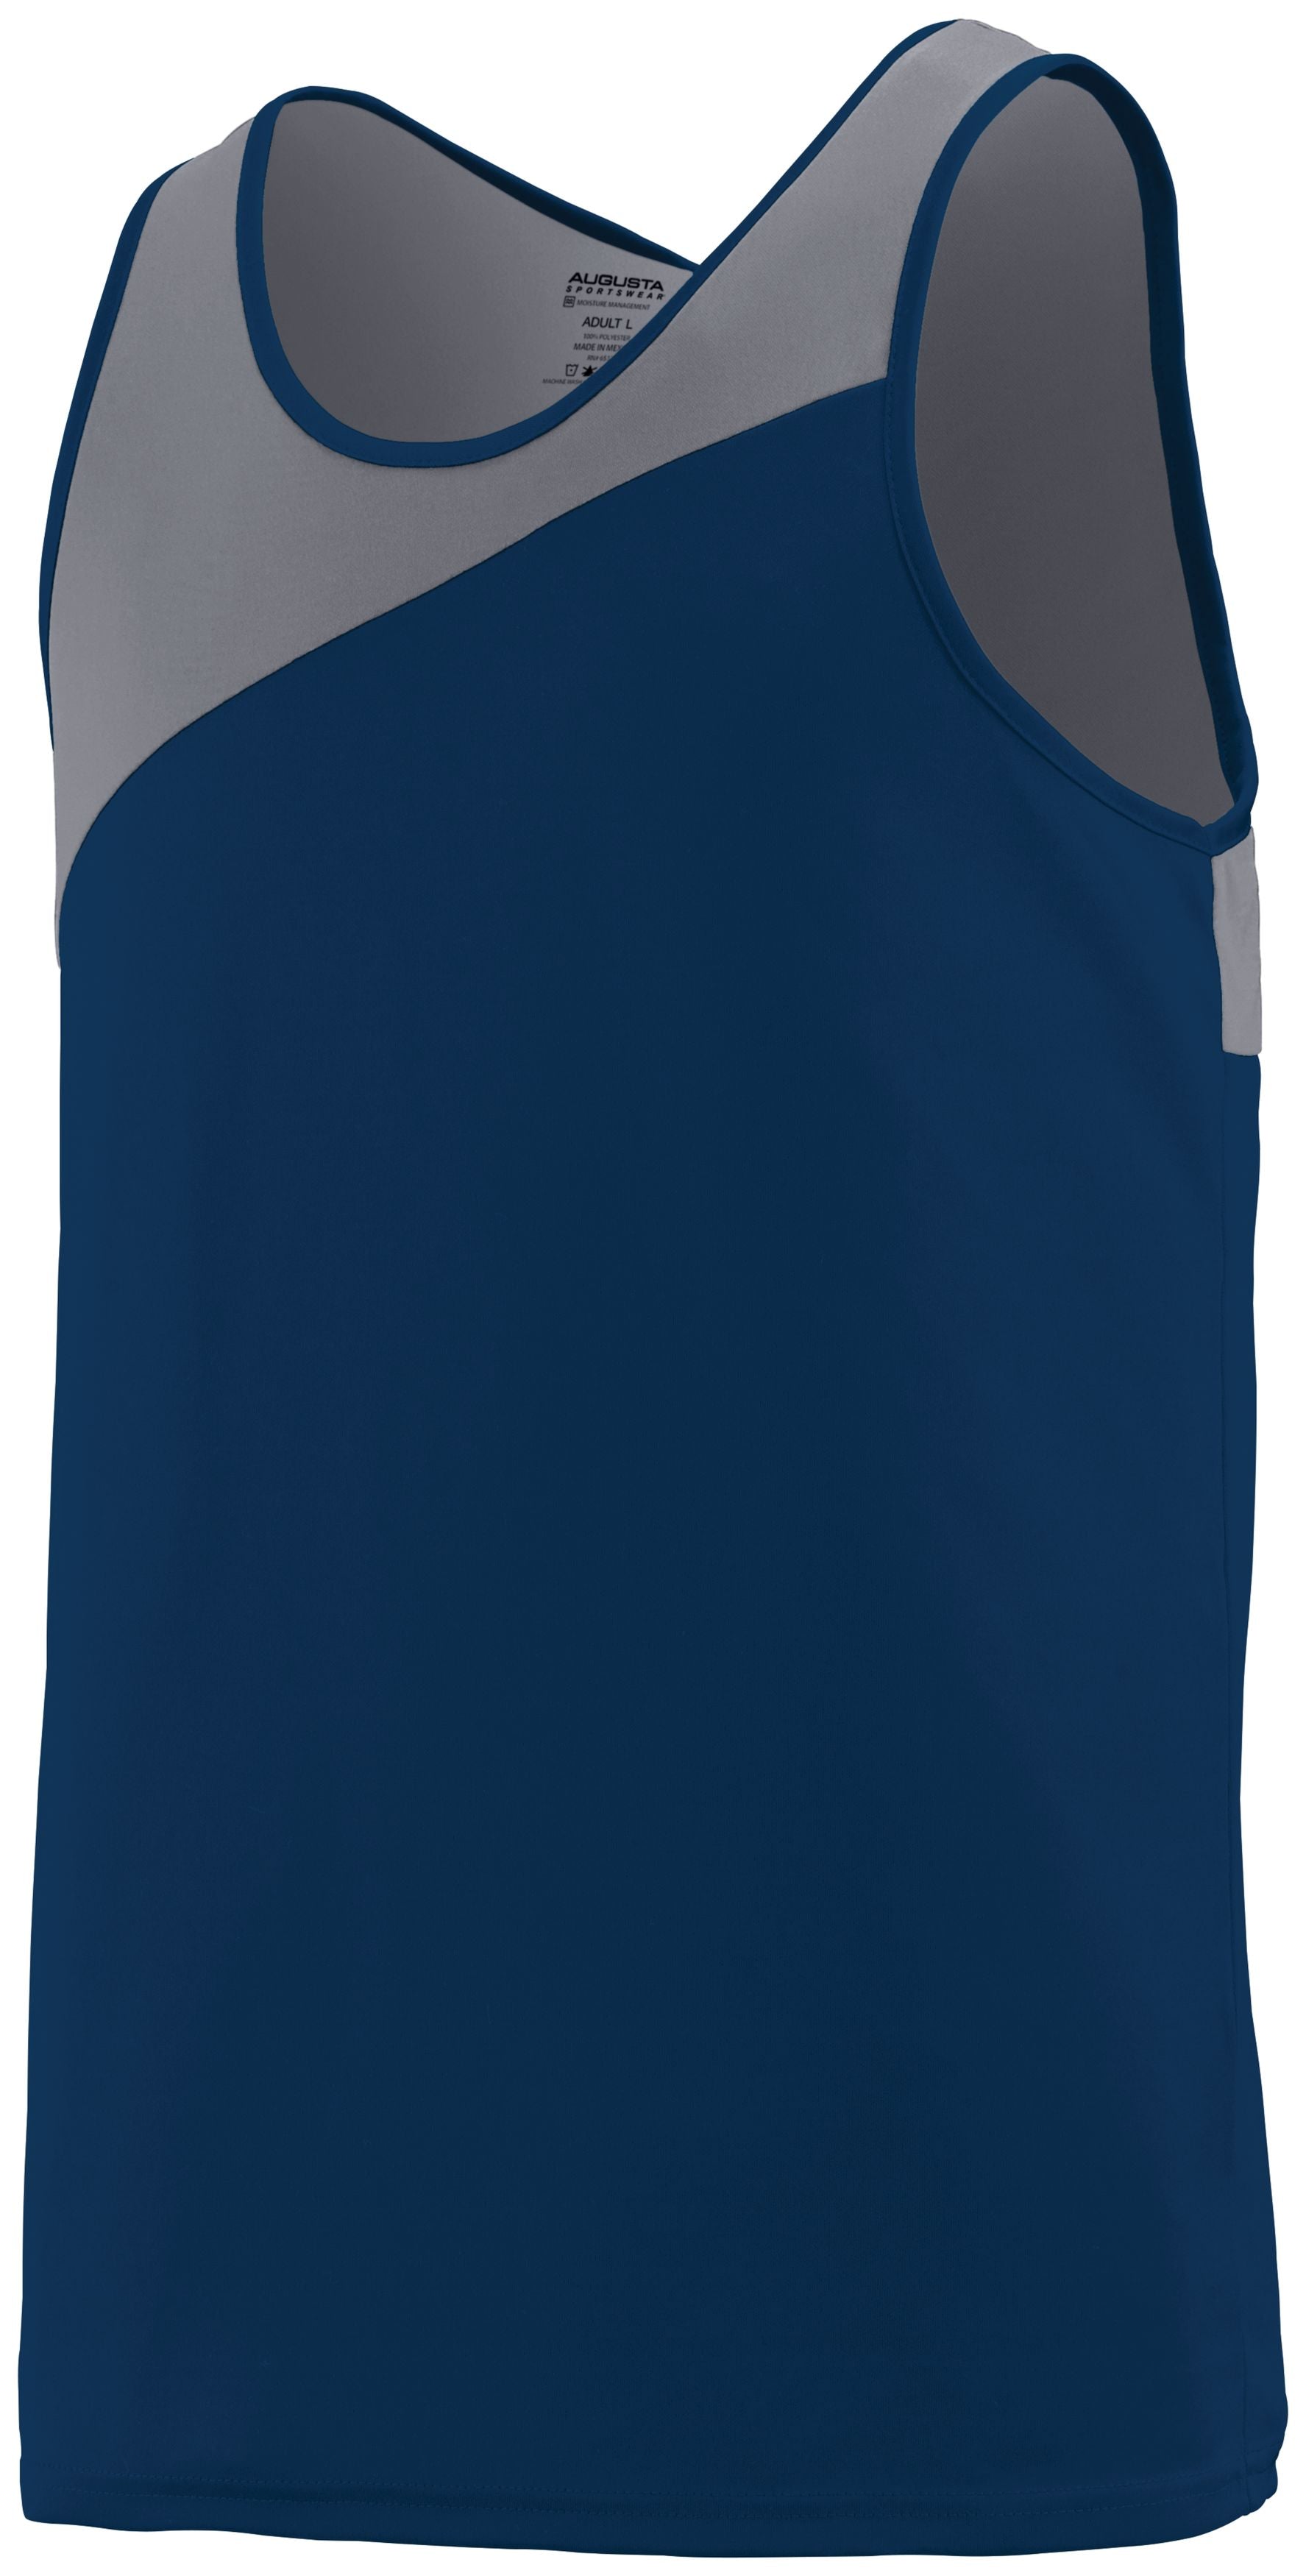 Augusta Sportswear Accelerate Jersey in Navy/Graphite  -Part of the Adult, Adult-Jersey, Augusta-Products, Track-Field, Shirts product lines at KanaleyCreations.com